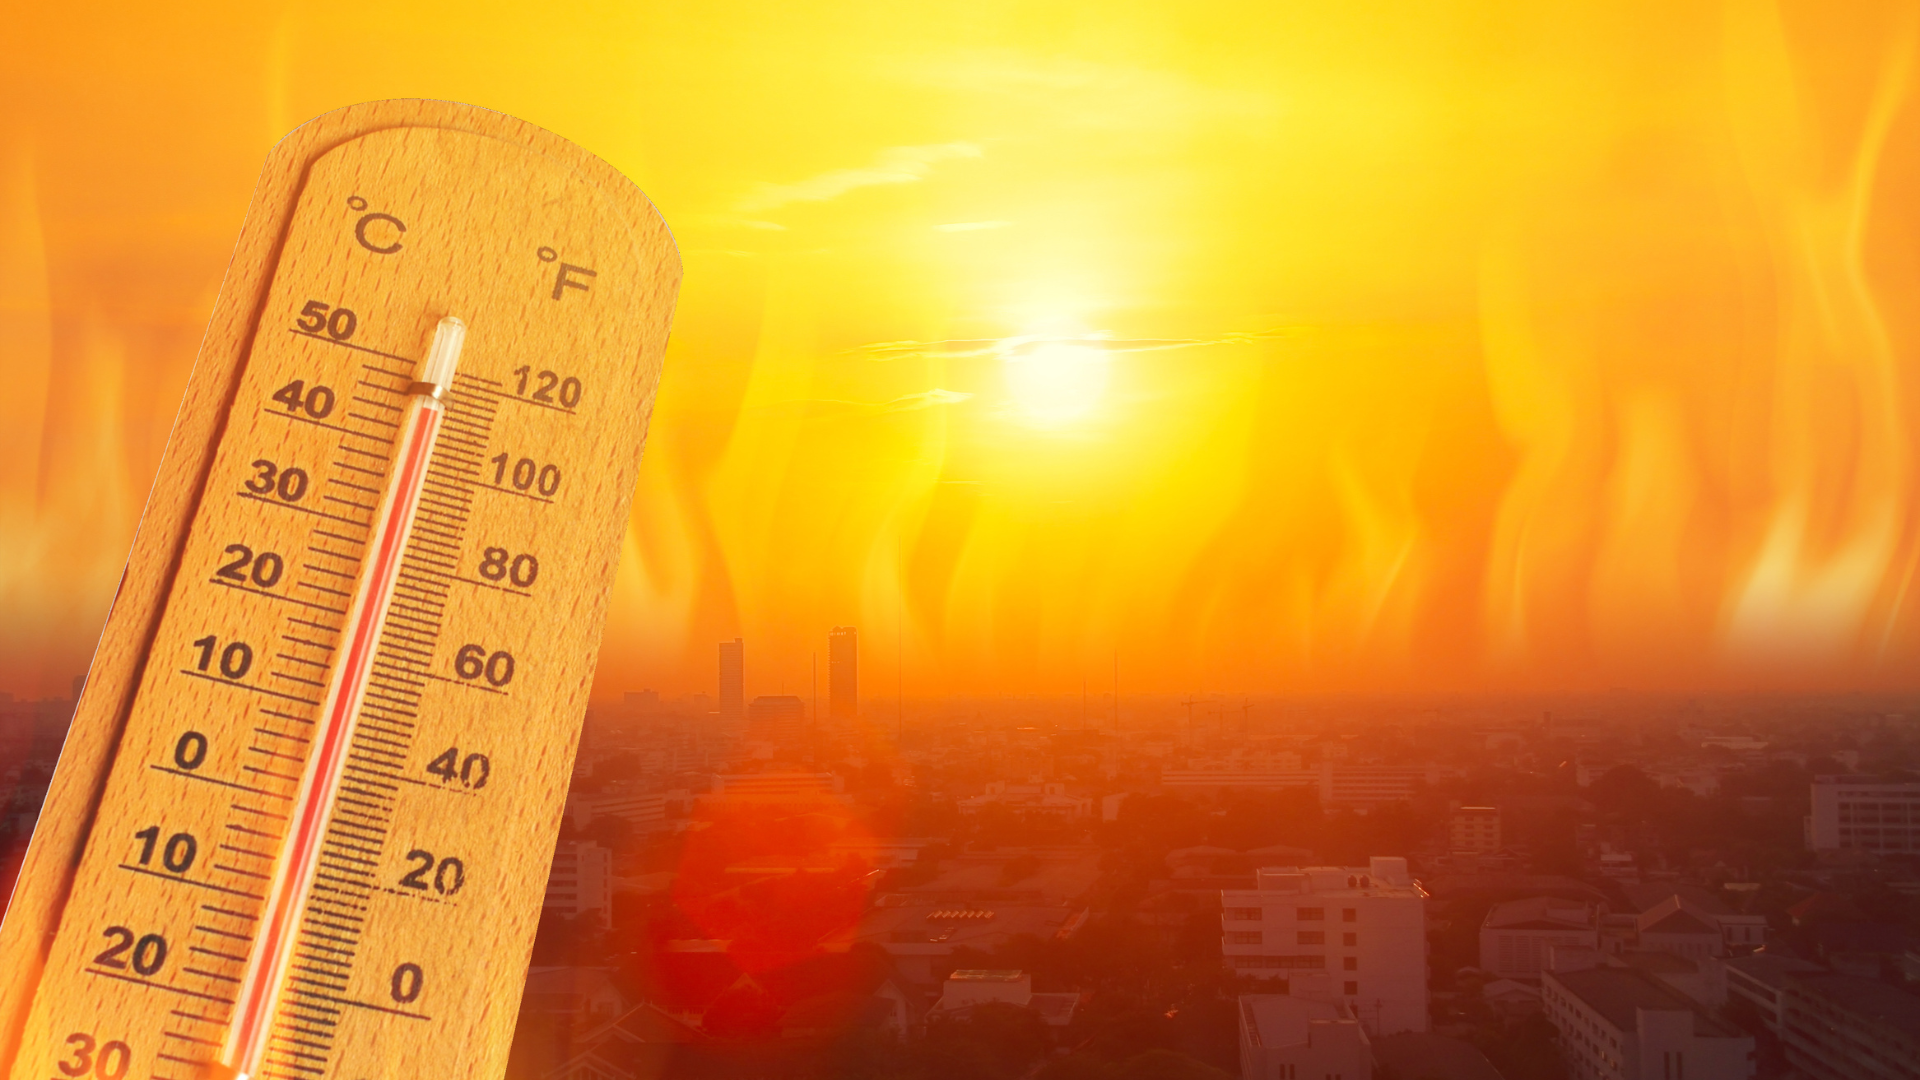 Some local government units have suspended the face-to-face classes for Thursday, May 8 due to extreme heat.